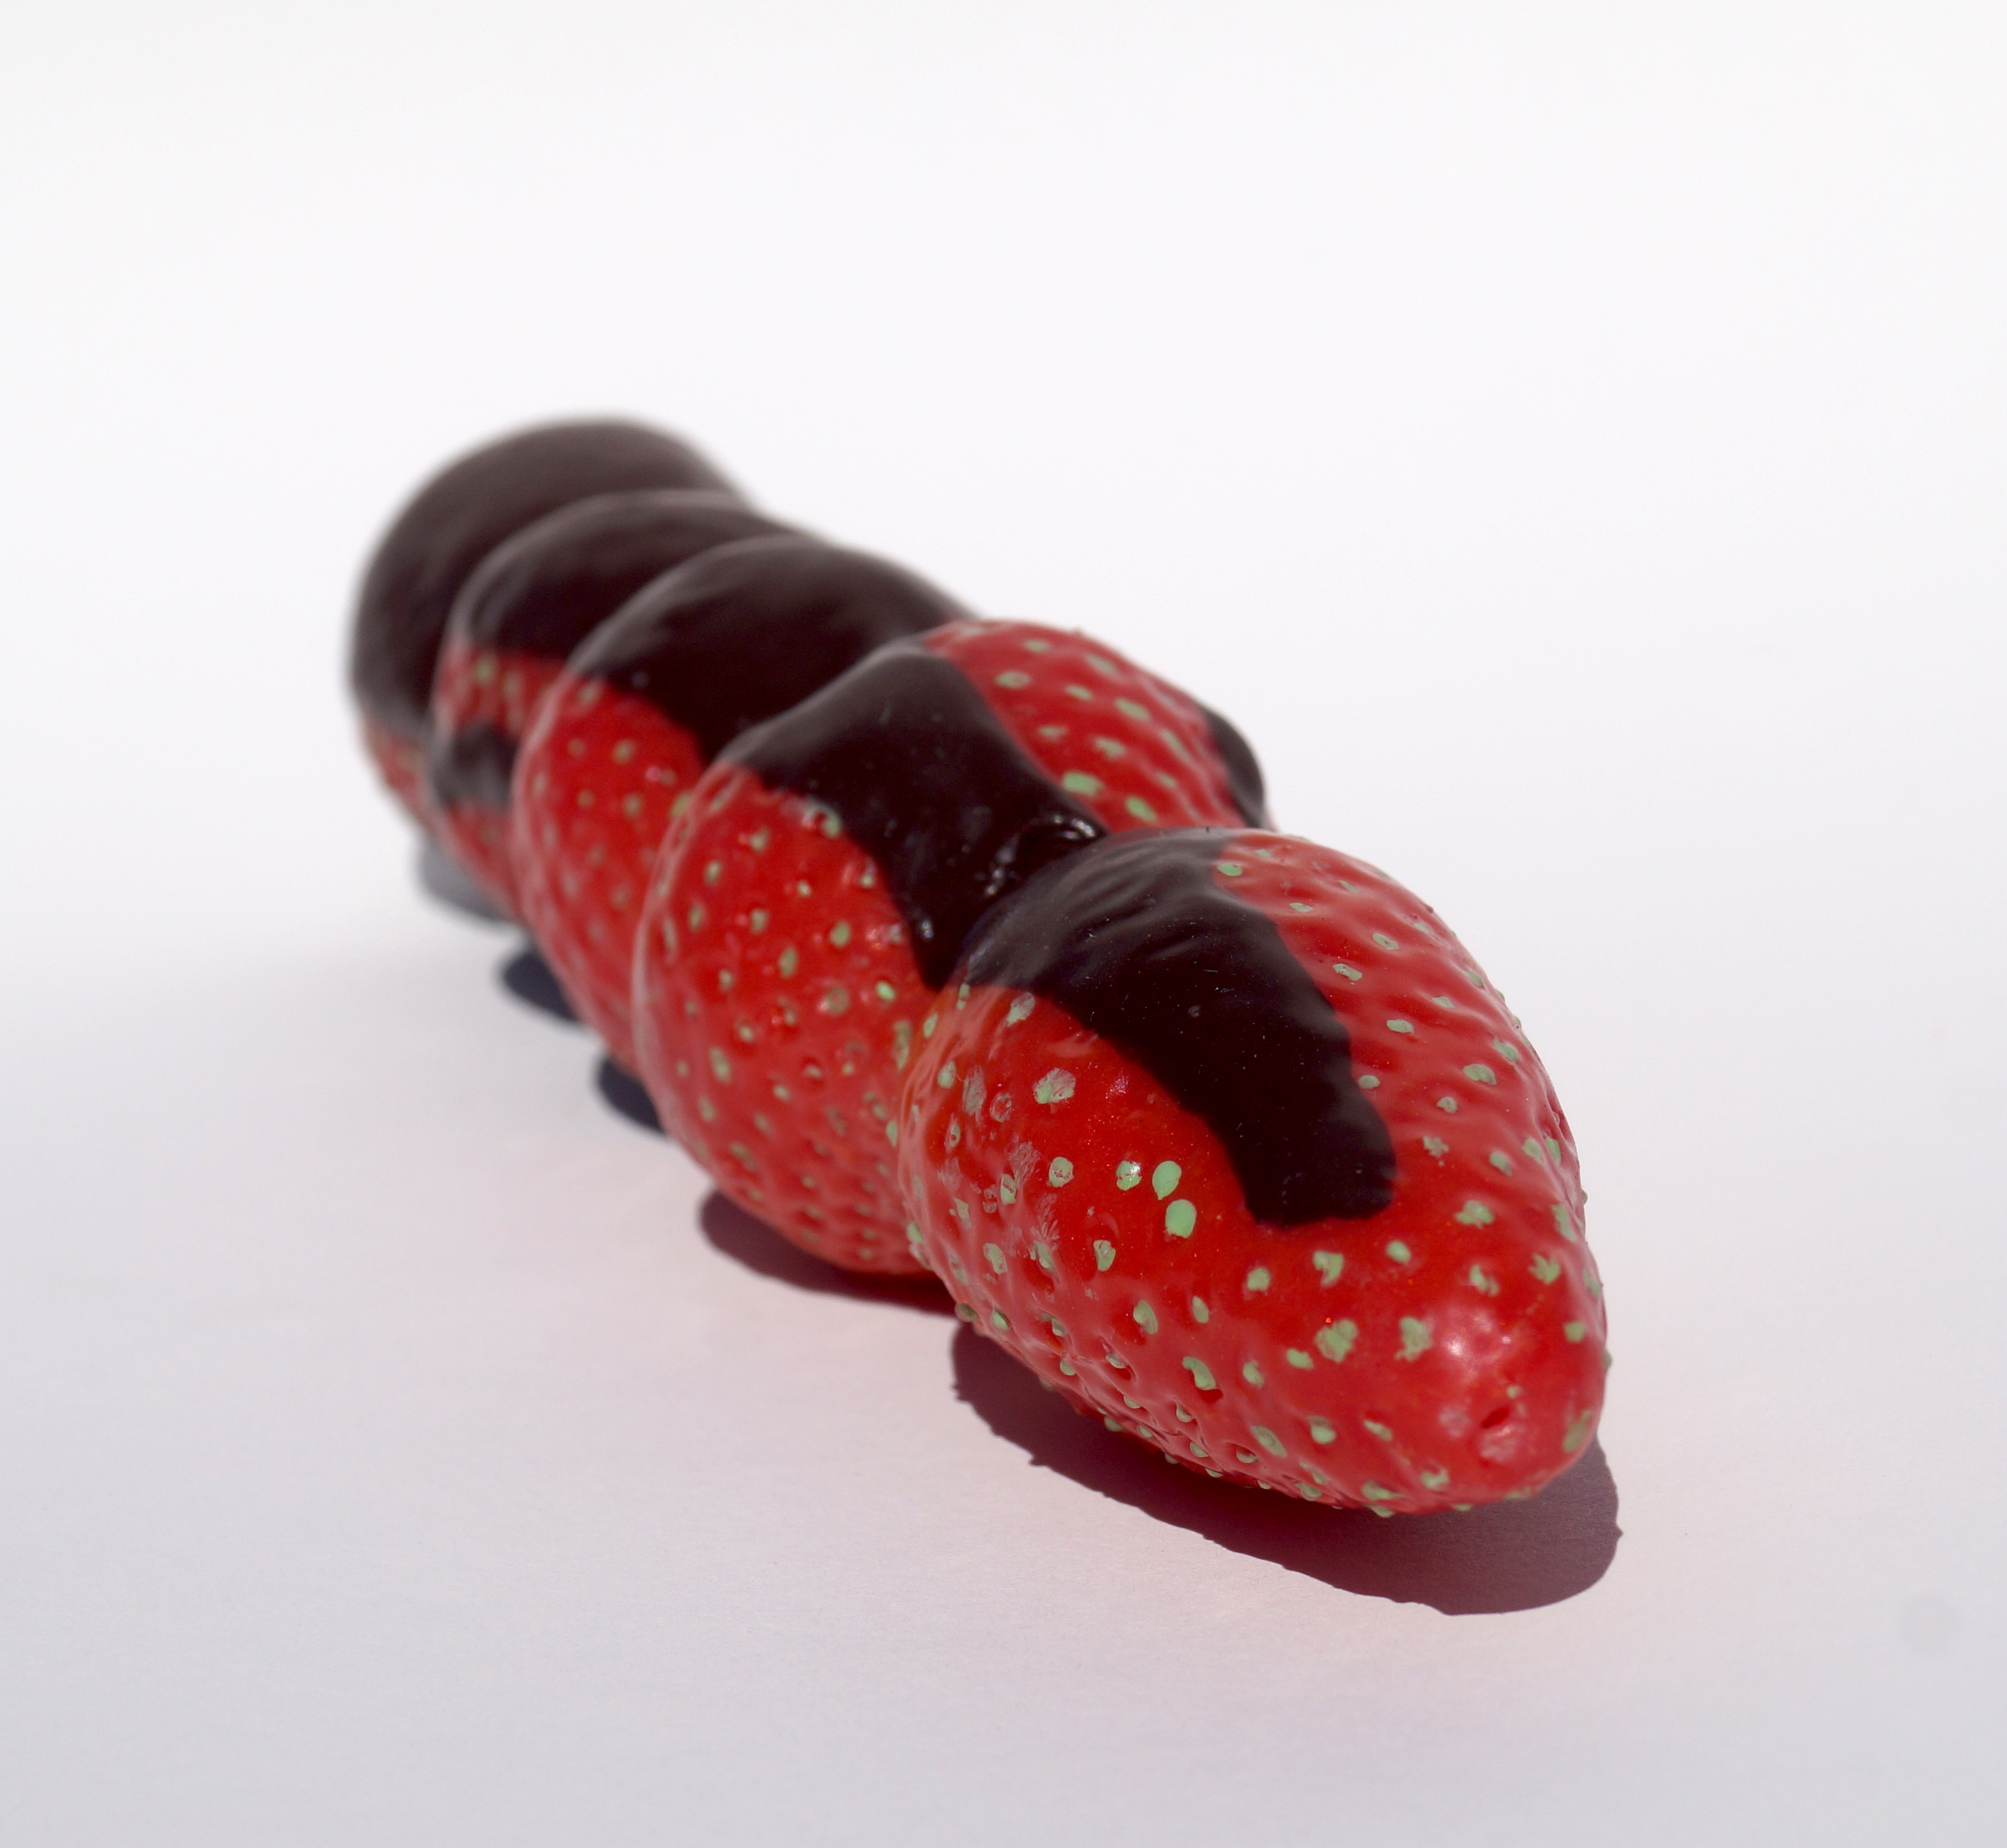 Strawberry feels forever - Strawberry fruit skewer with chocolate photo